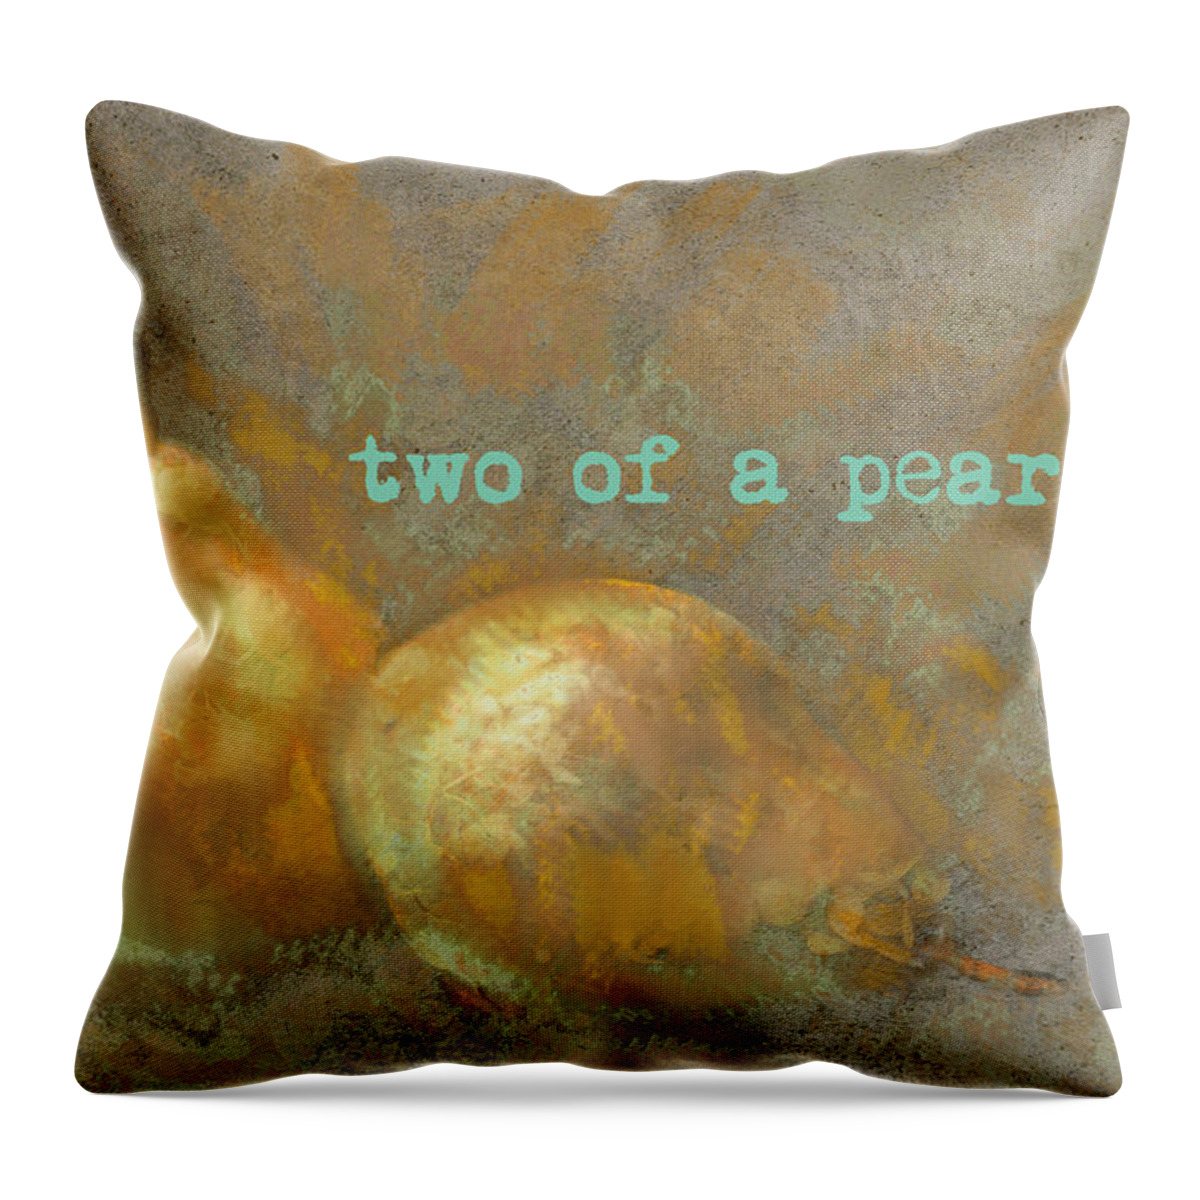 Two Pears Throw Pillow featuring the photograph Two Of A Pear by Suzanne Powers